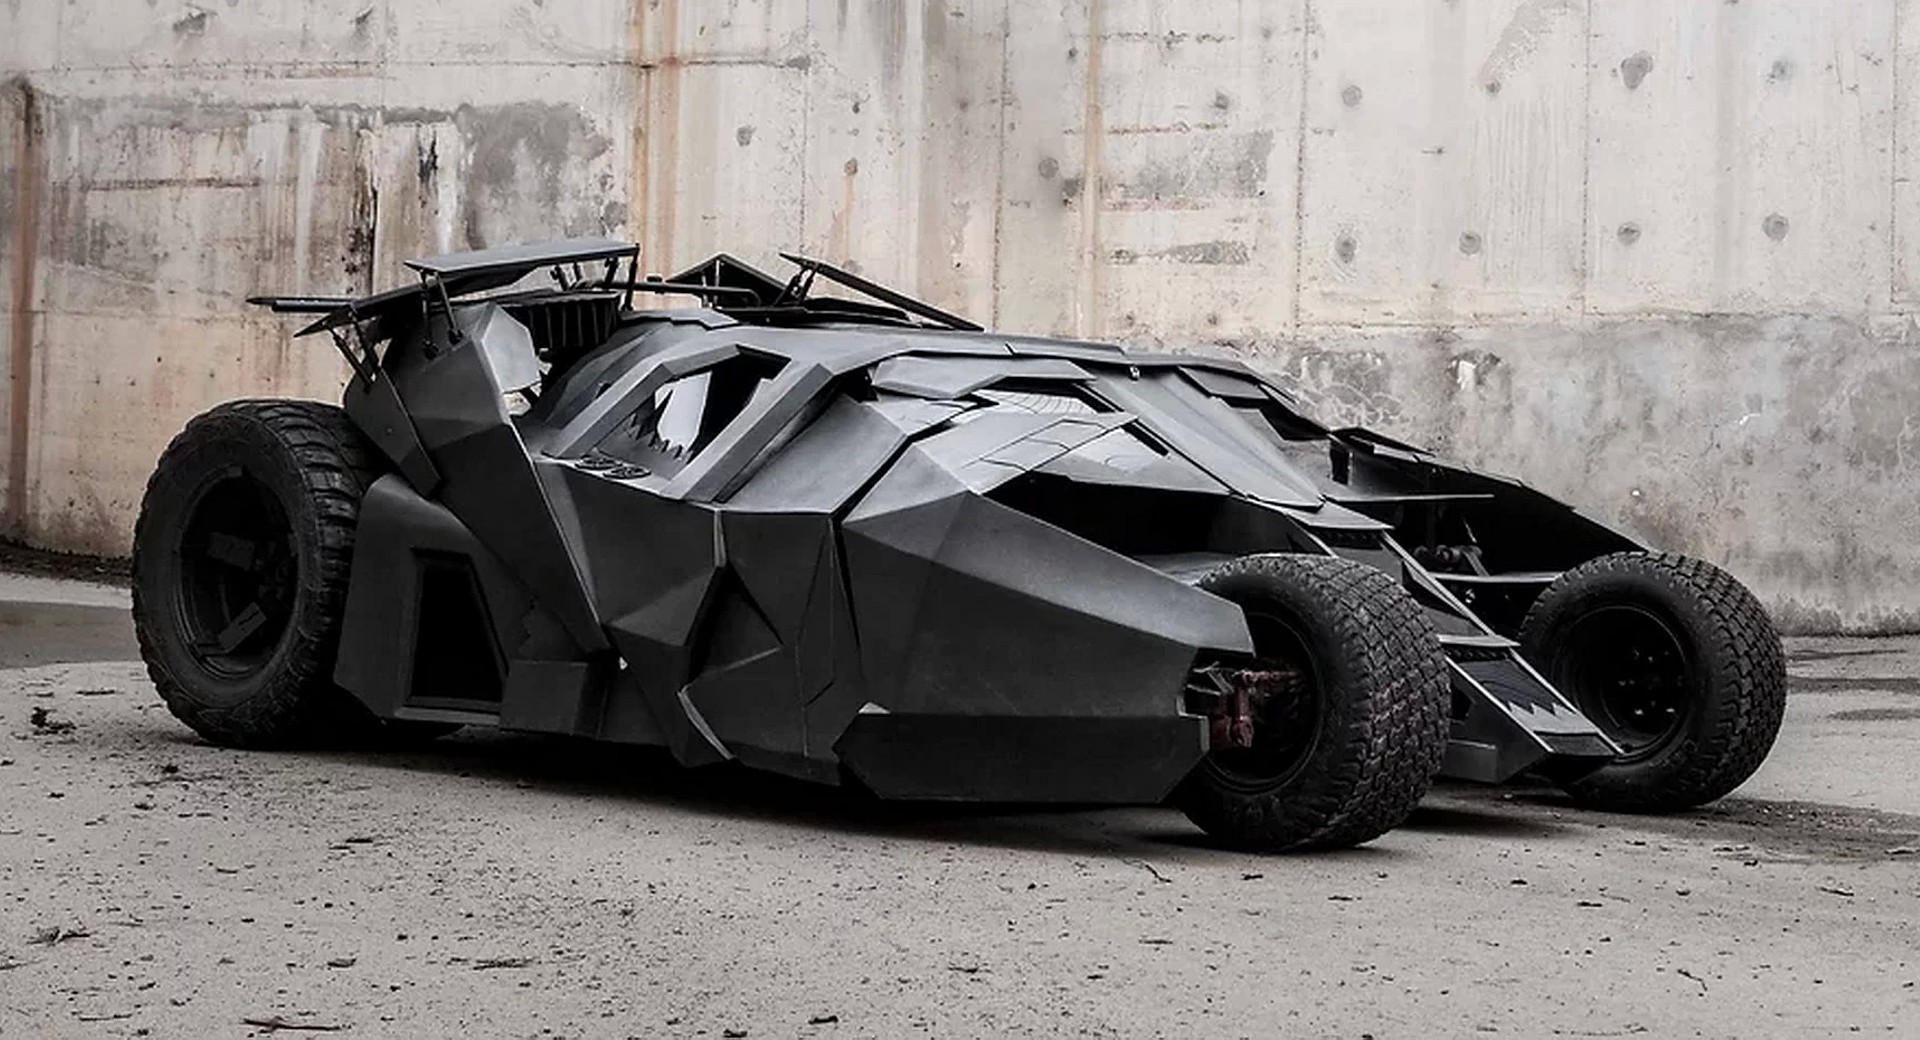 The Dark Knight Goes Green With This Electric Batmobile Tumbler Replica |  Carscoops